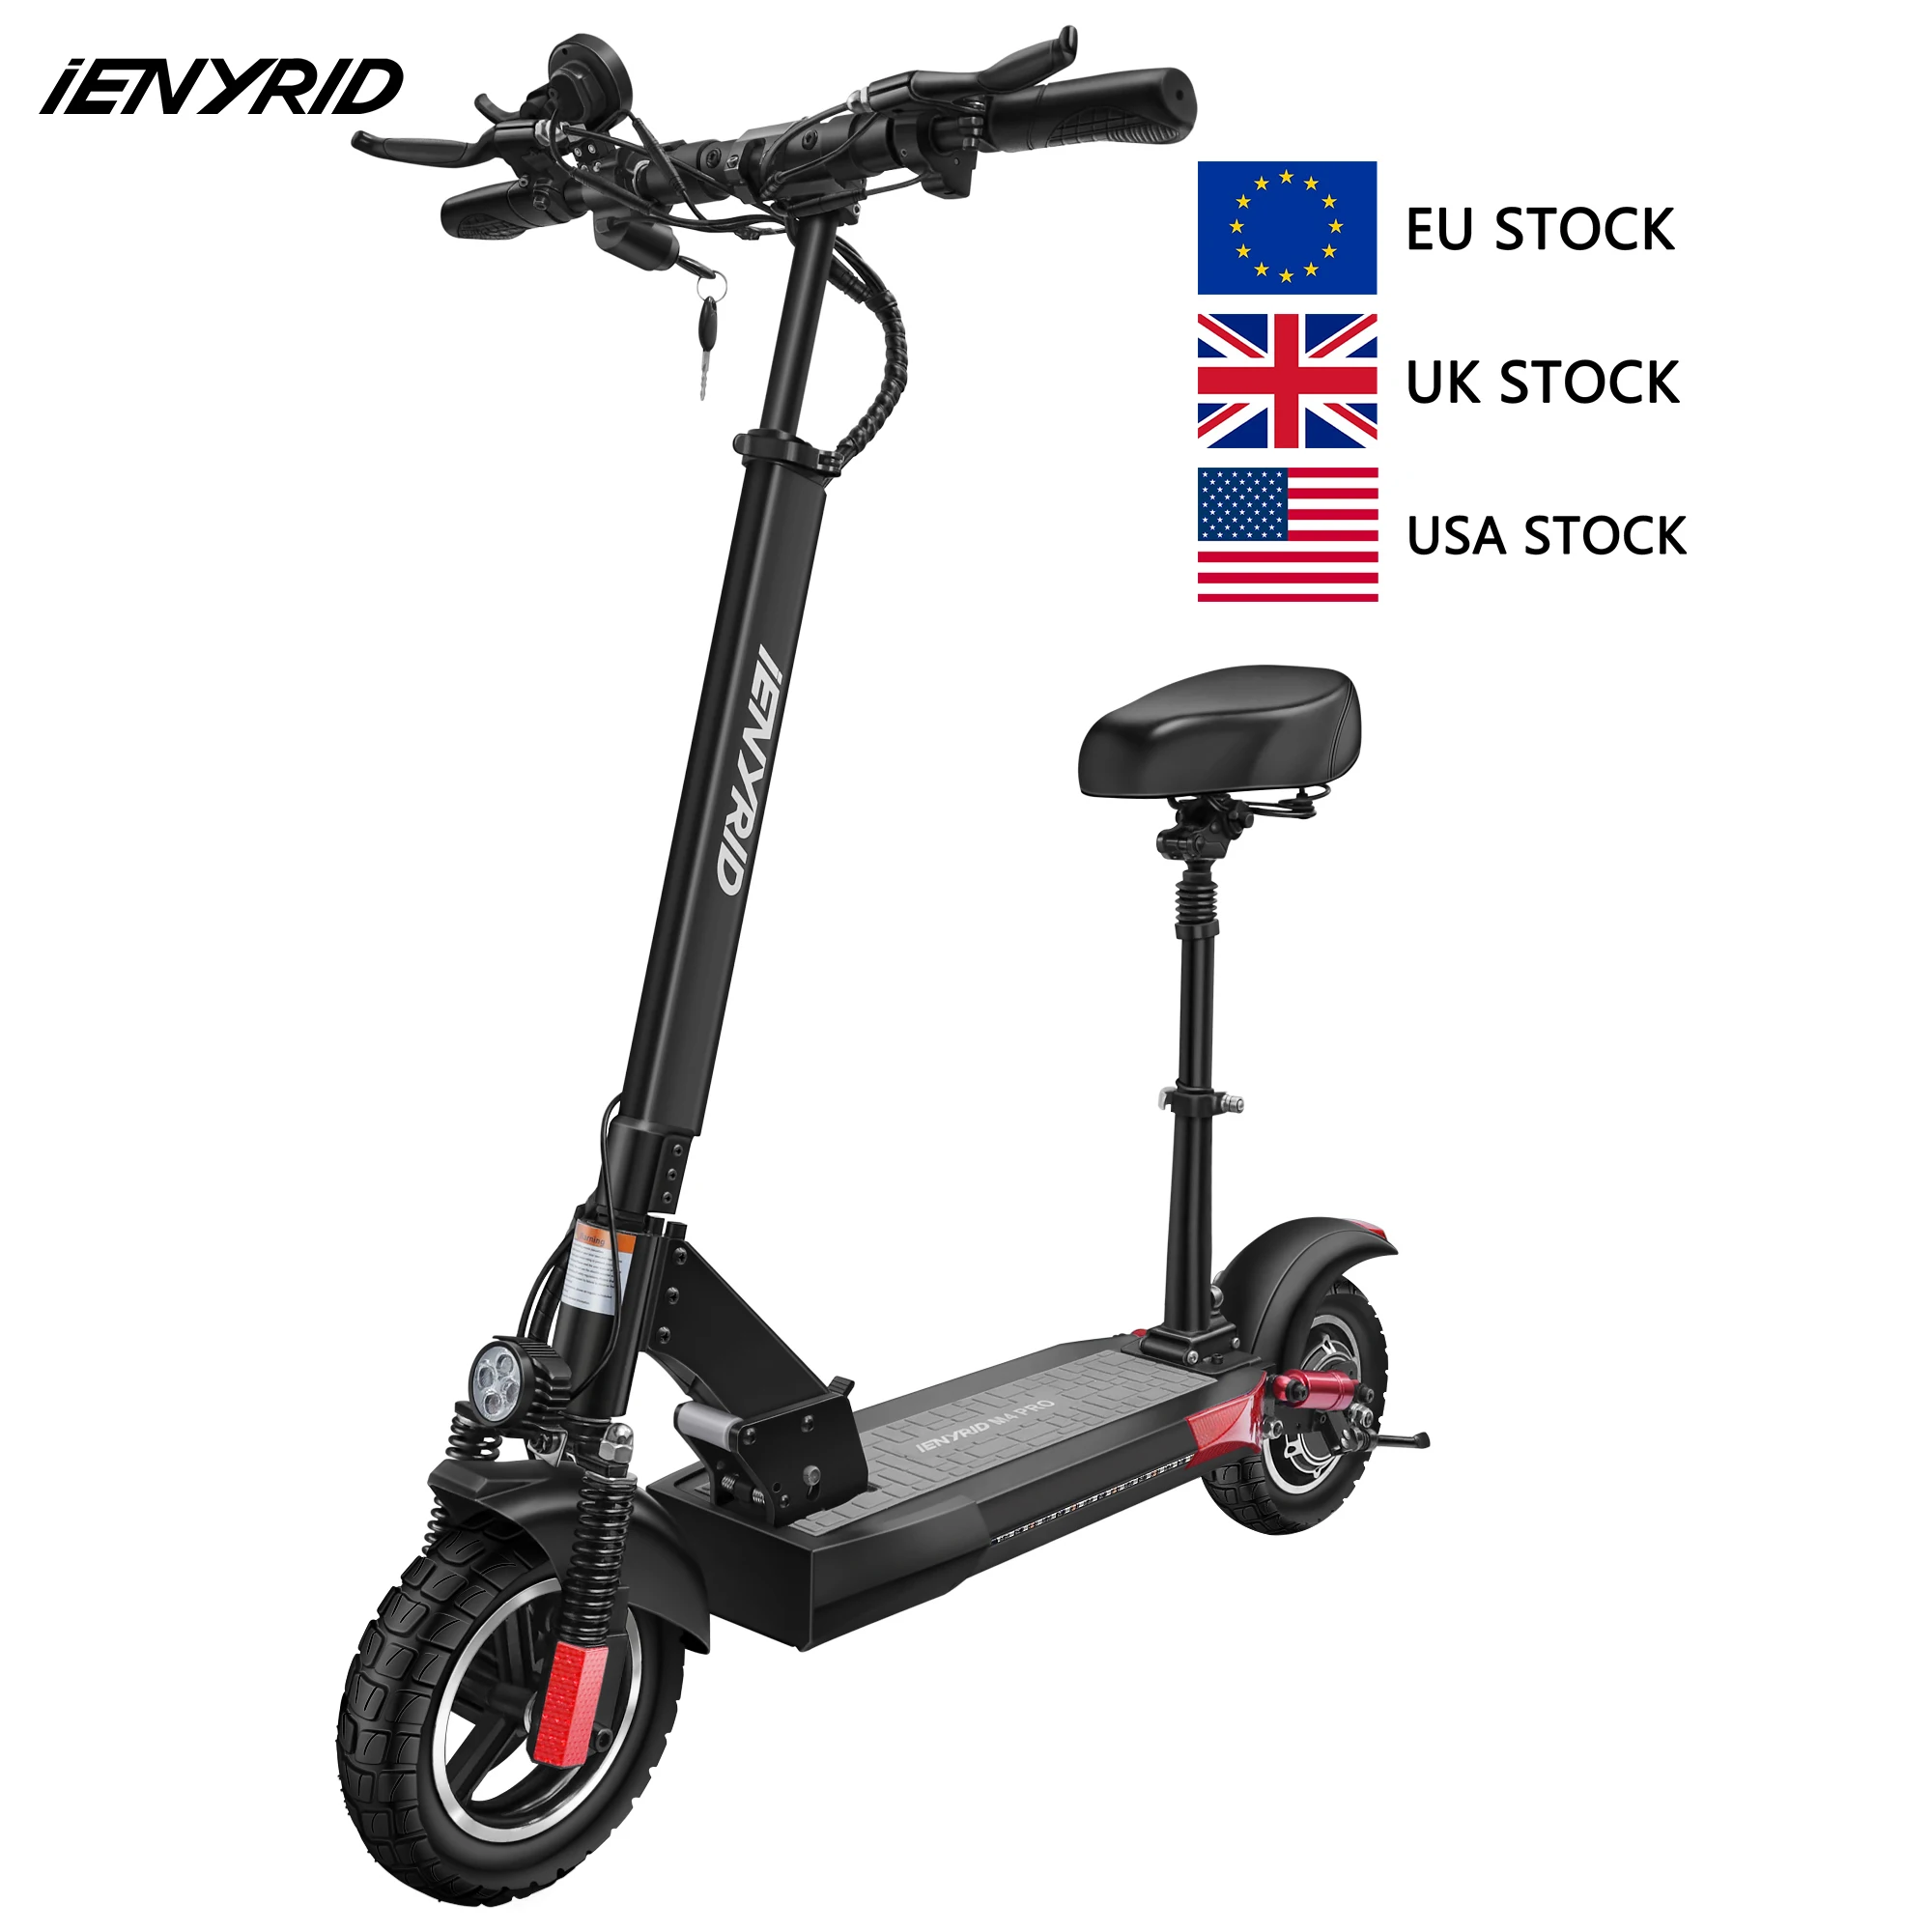 

UK EU US warehouse iENYRID M4 Pro e scooter electric scooter bike adult 500W Powerful electric bike scooters with seat